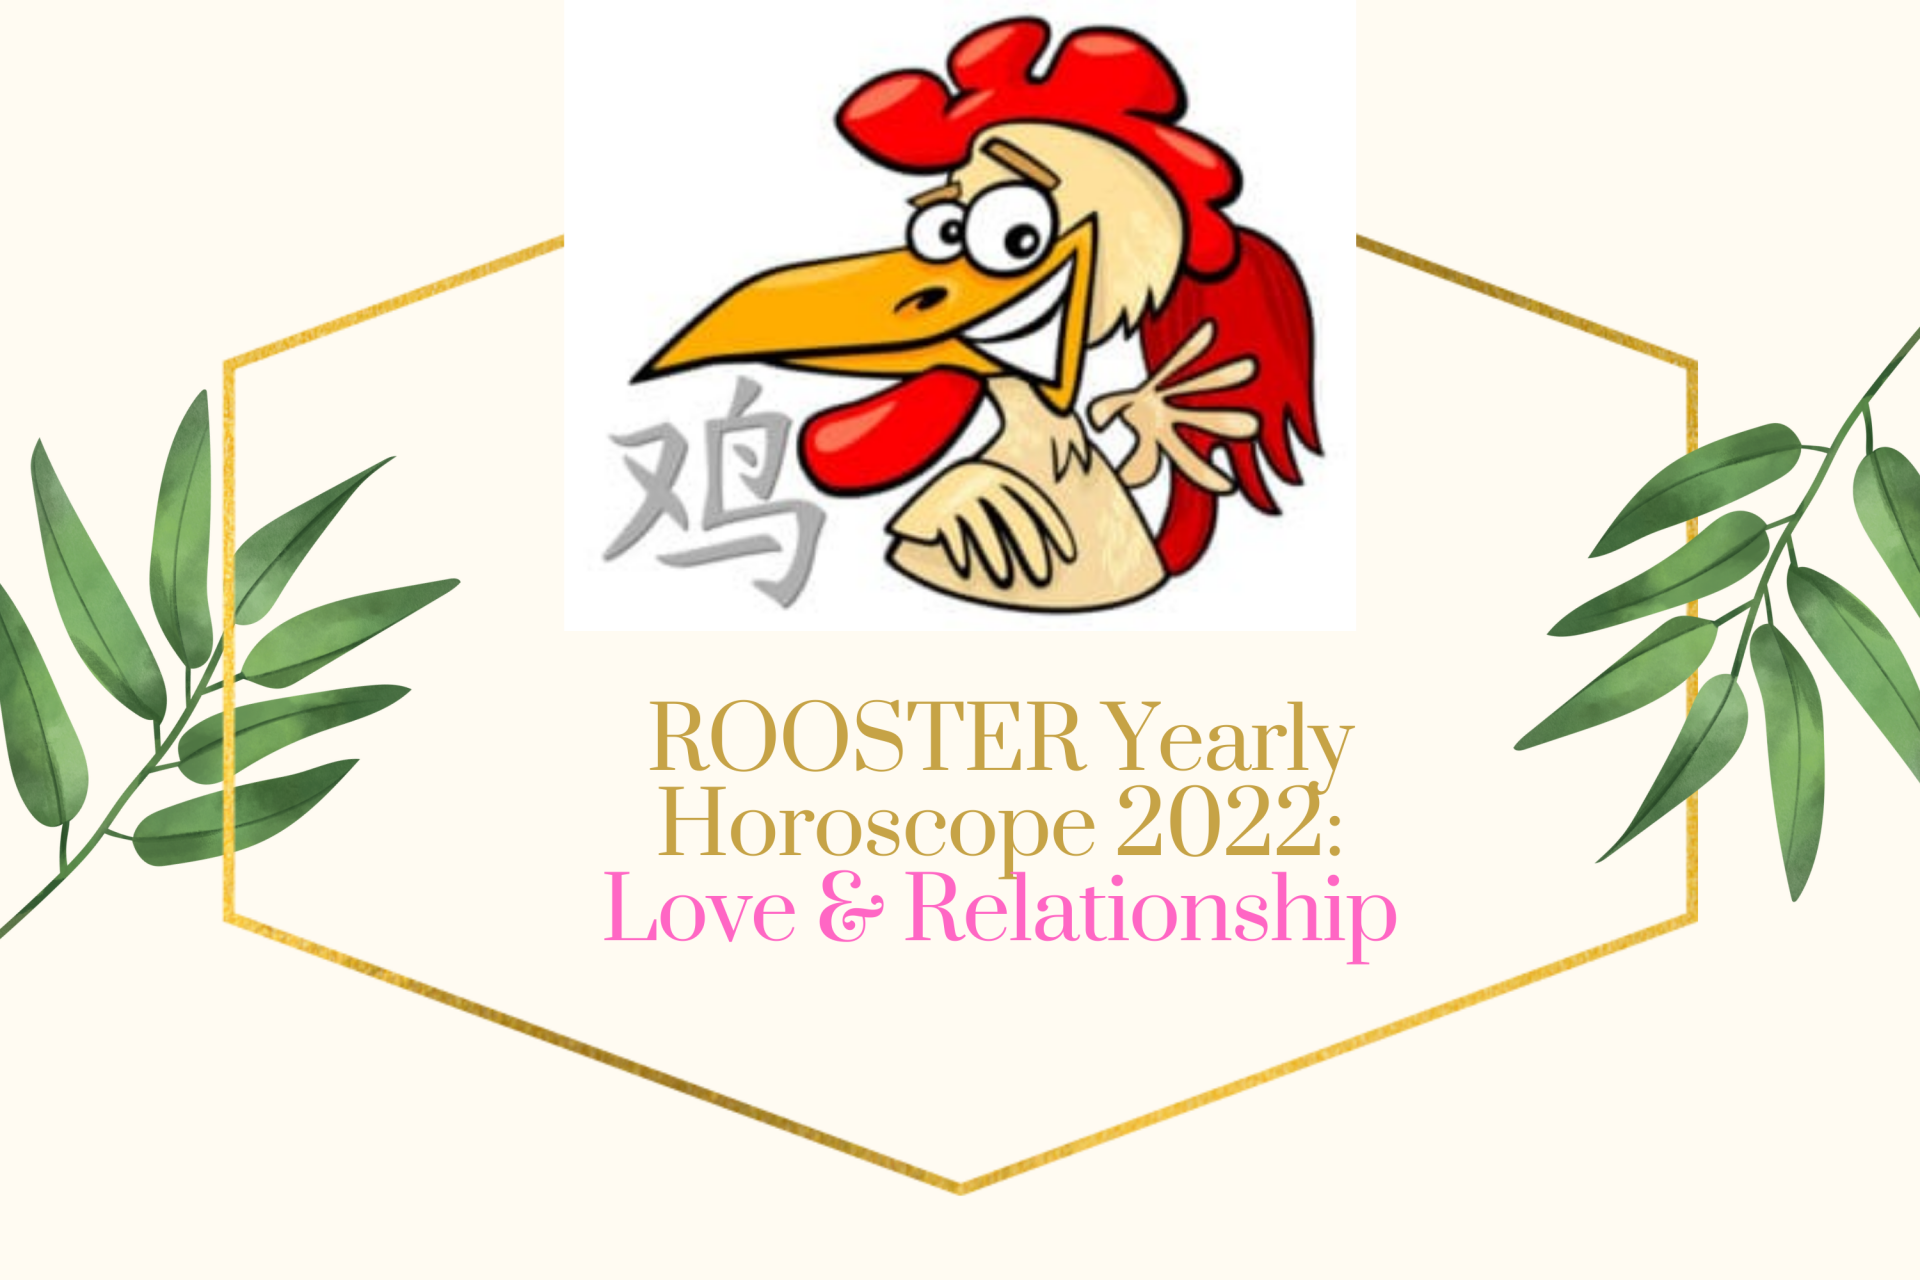 ROOSTER Yearly Horoscope 2022 – Feng Shui Prediction for Love & Relationship